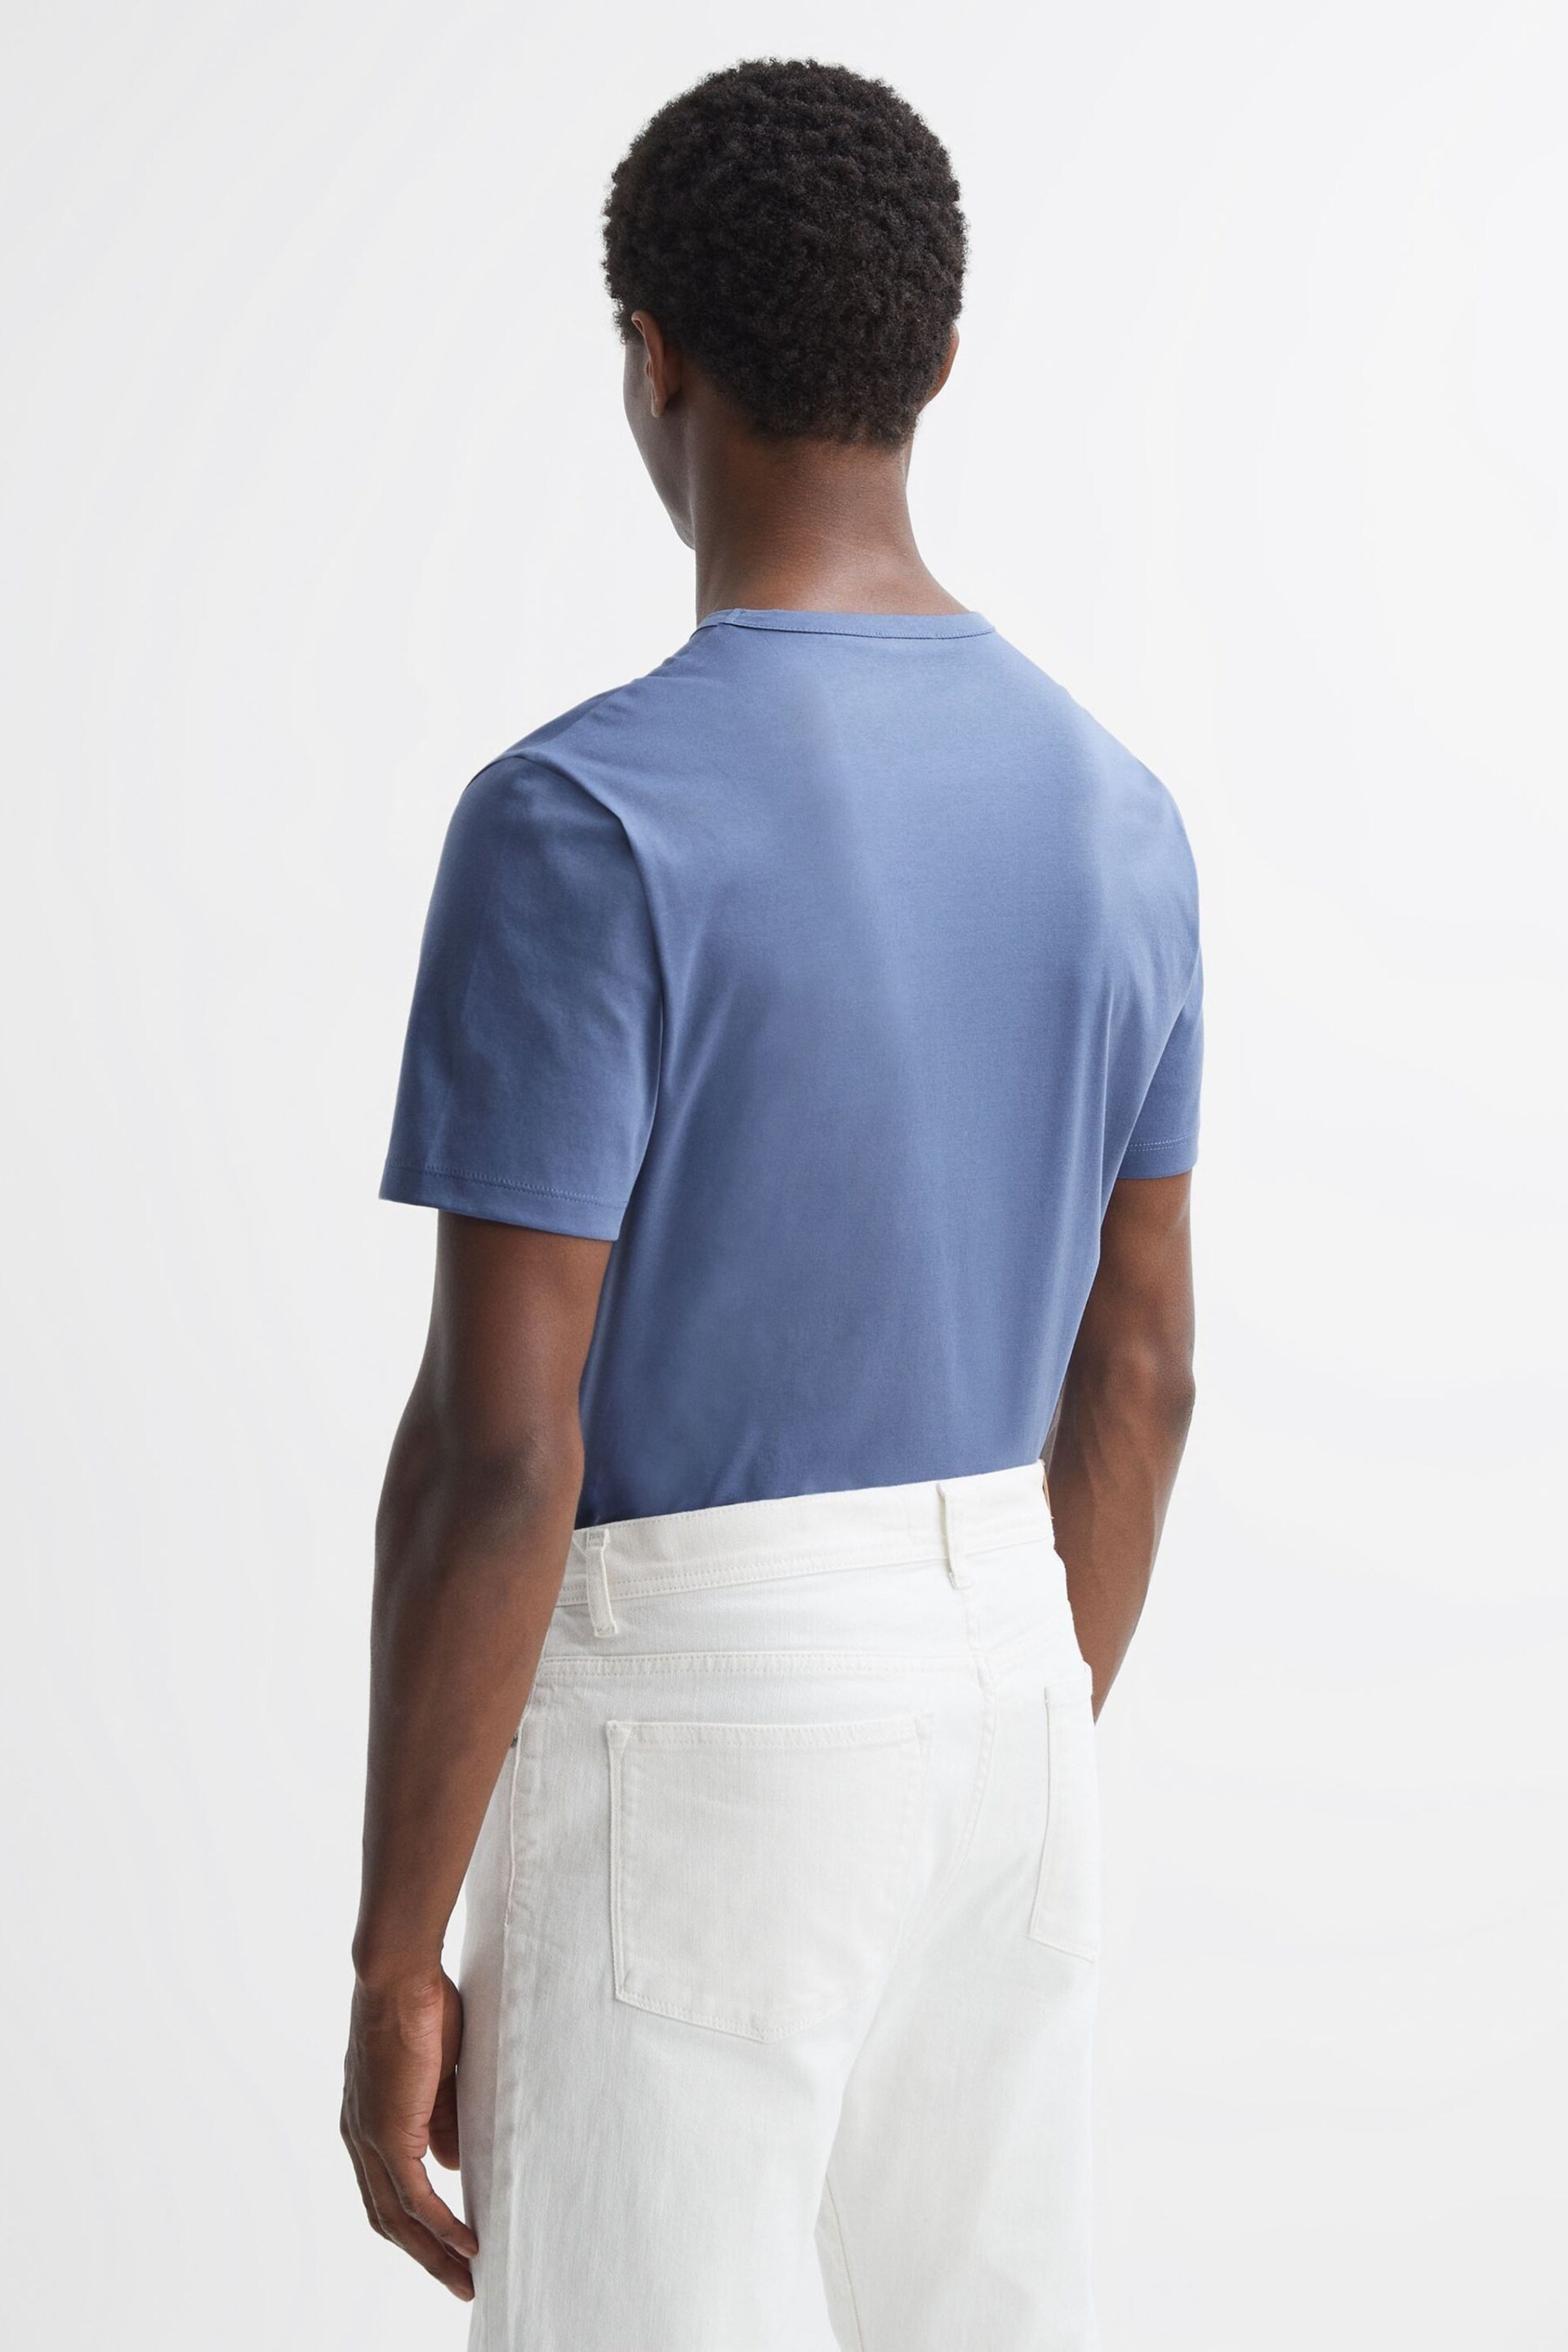 Reiss Airforce Blue Day Mercerised Cotton Crew Neck T-Shirt - Image 5 of 5